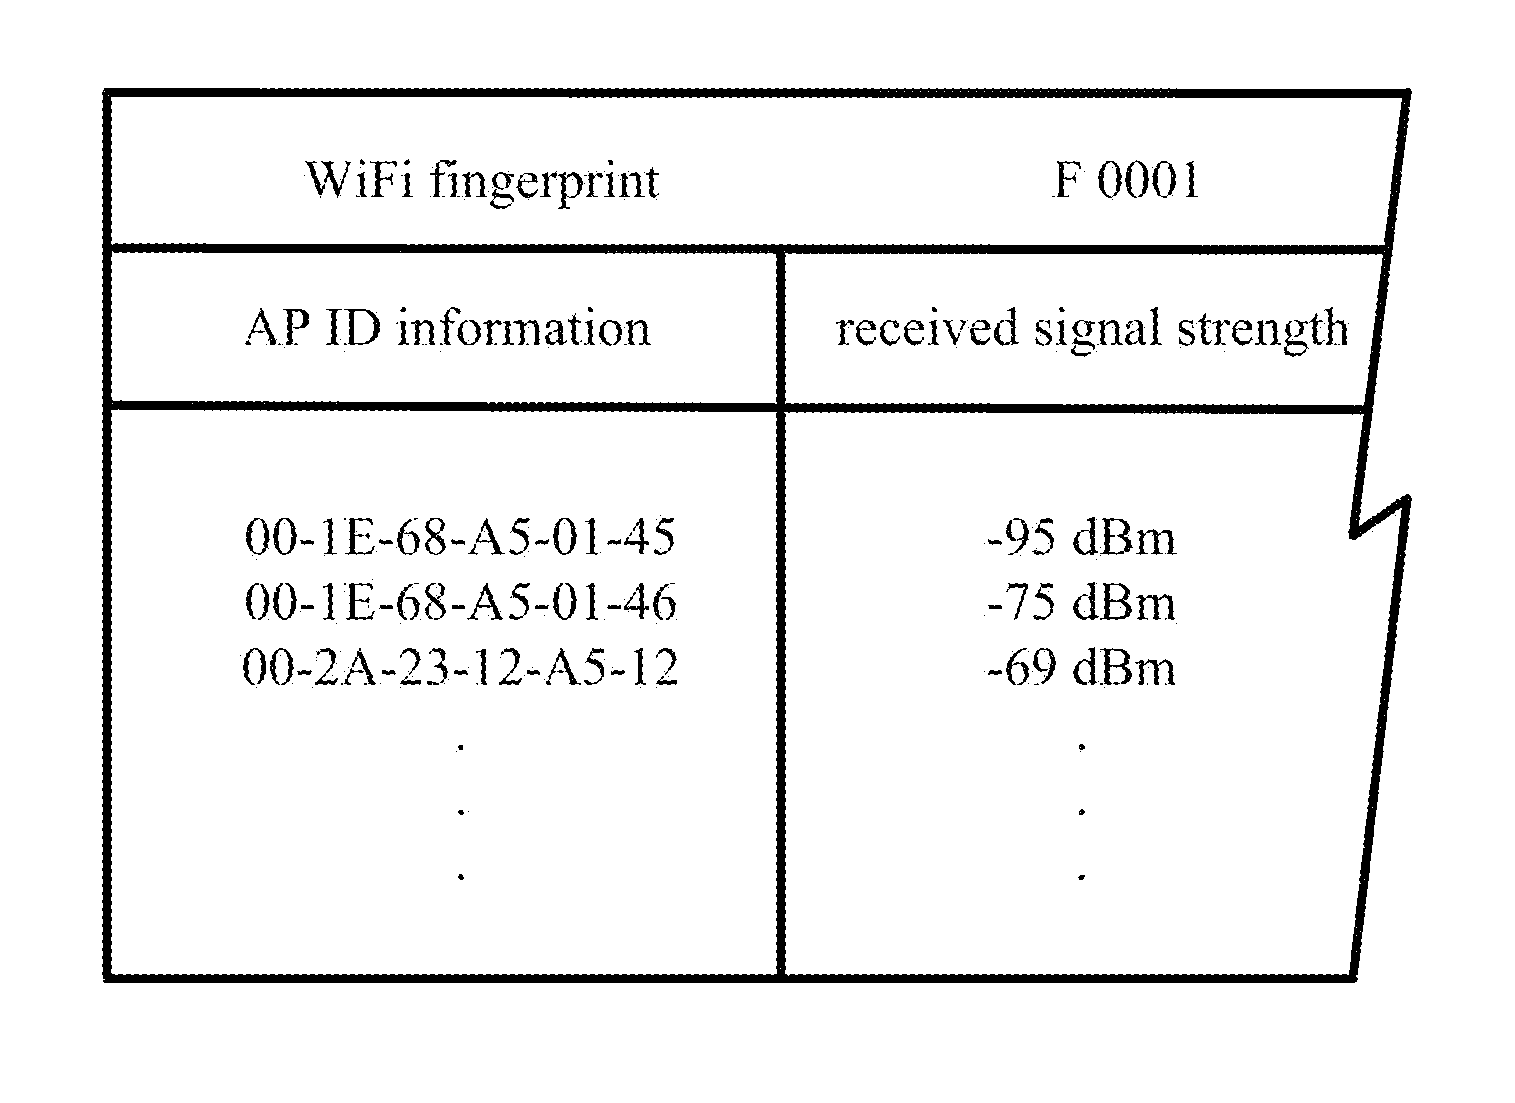 Method of estimating location of mobile device in transportation using WiFi